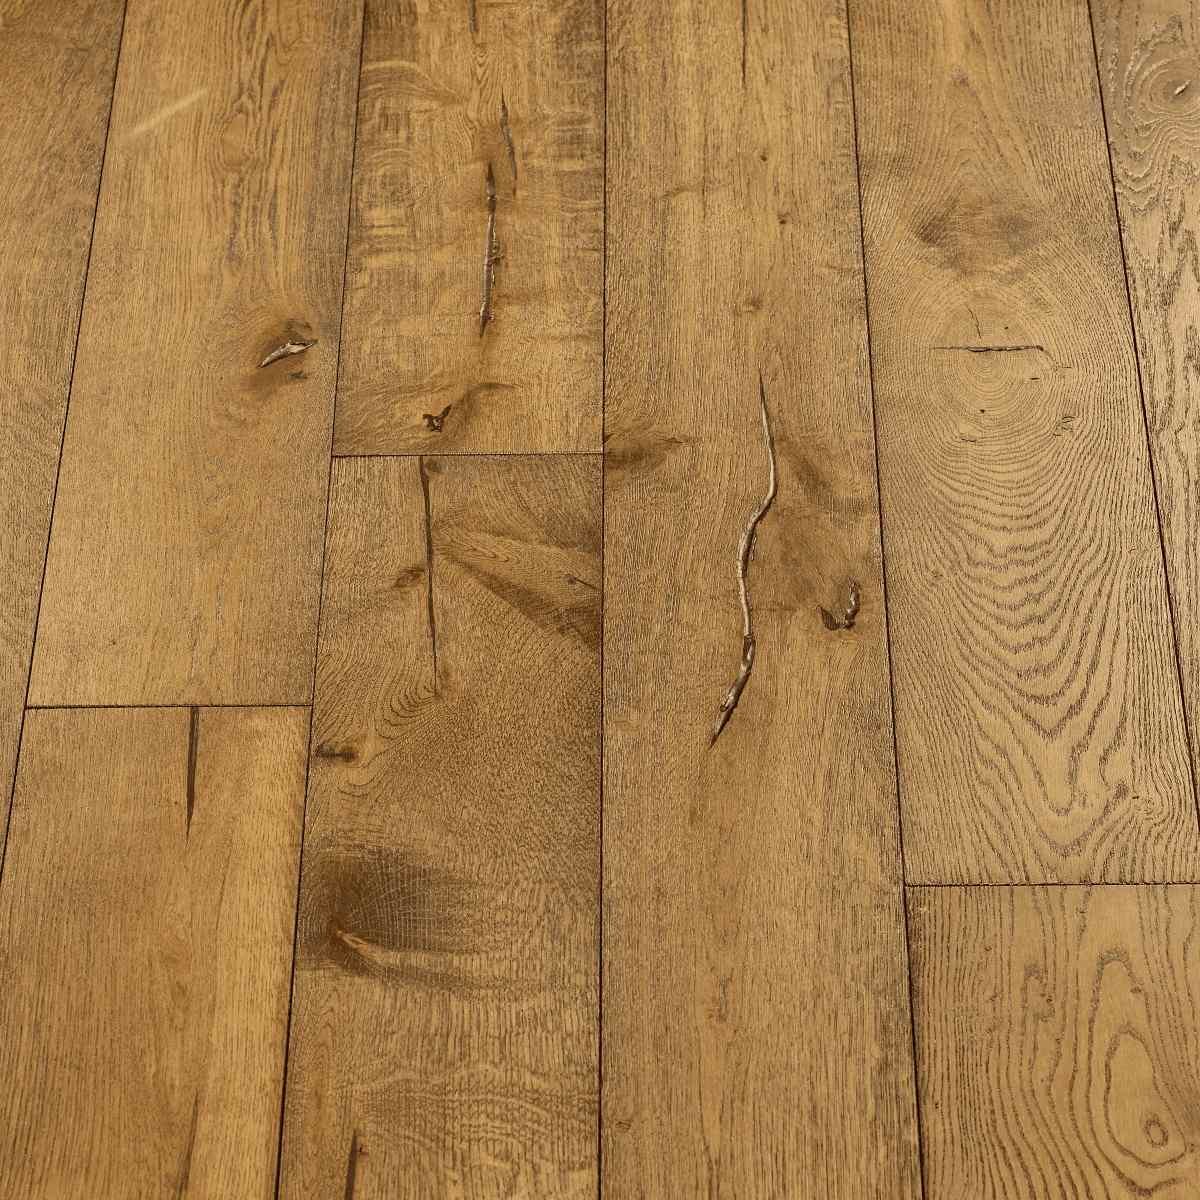 Distressed Smoked WoodFlooring - image displaying distressed smoked-toned wood flooring with a worn and aged appearance, evoking a sense of history and character.